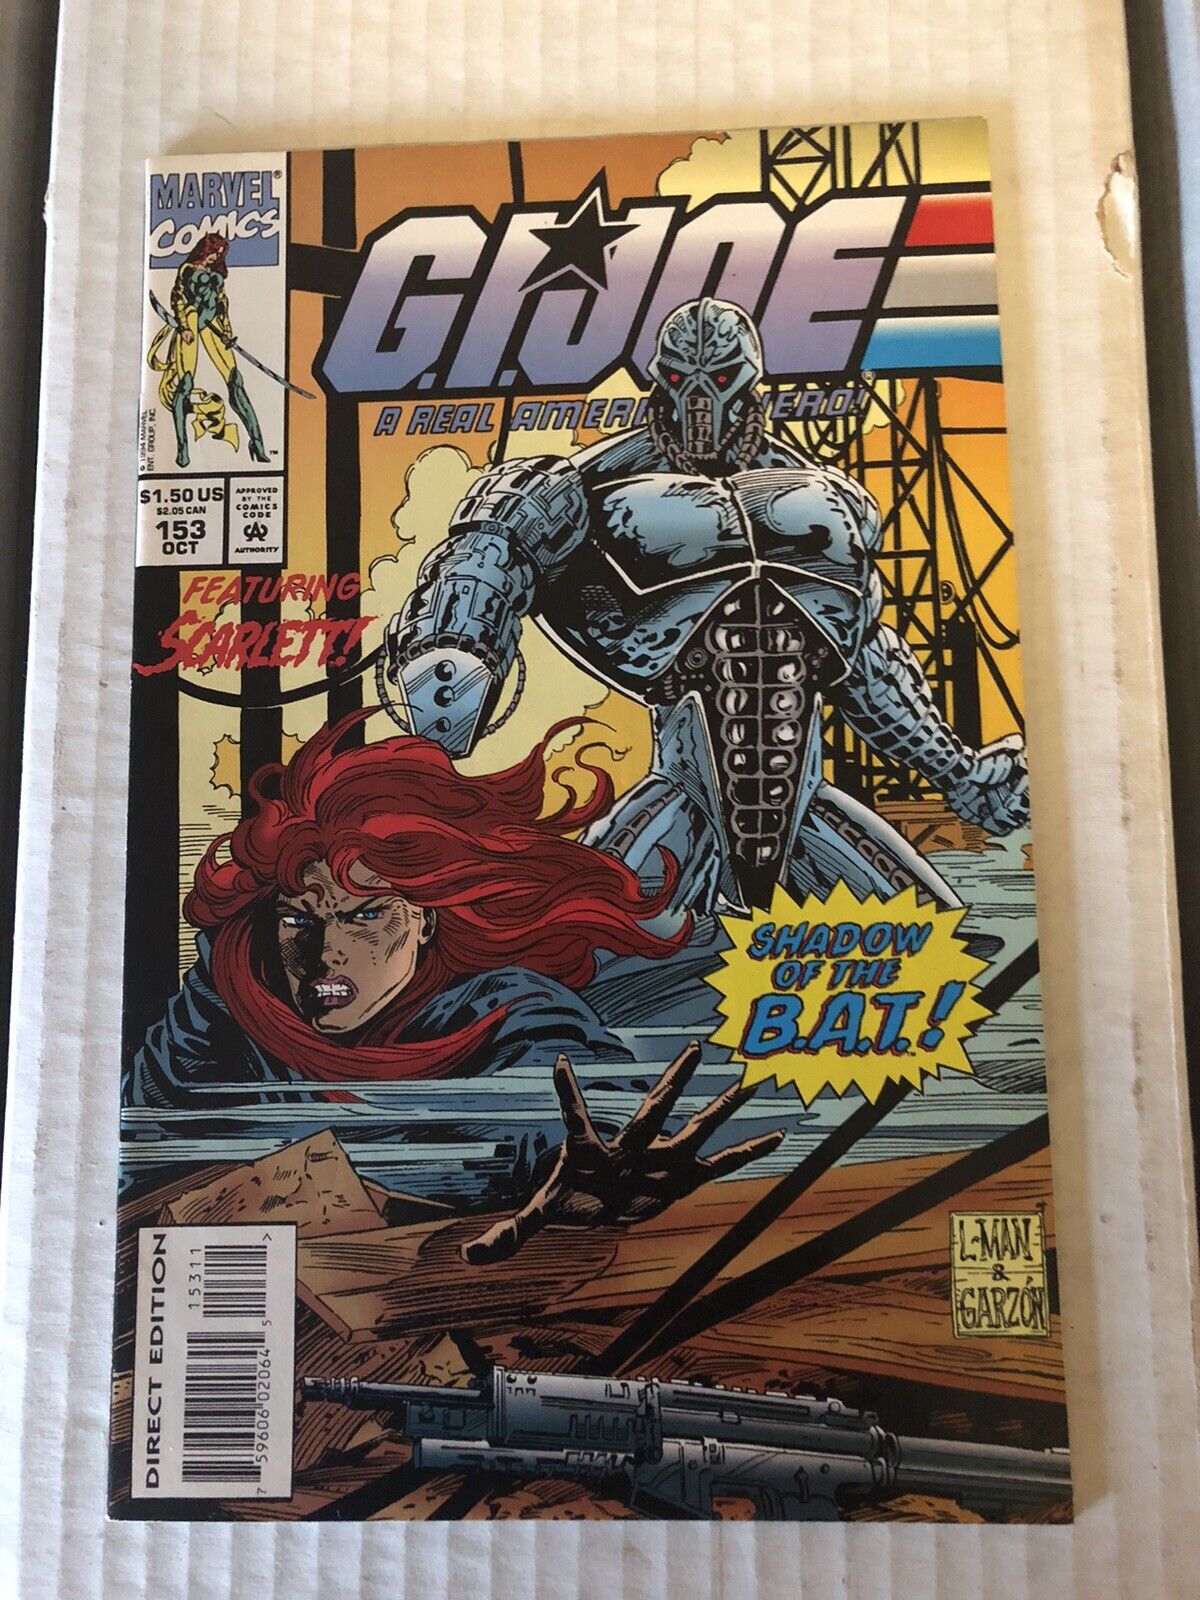 G.I. JOE : A REAL AMERICAN HERO #153 (MARVEL 1994) LOW PRINT LATER ISSUE HTF VF